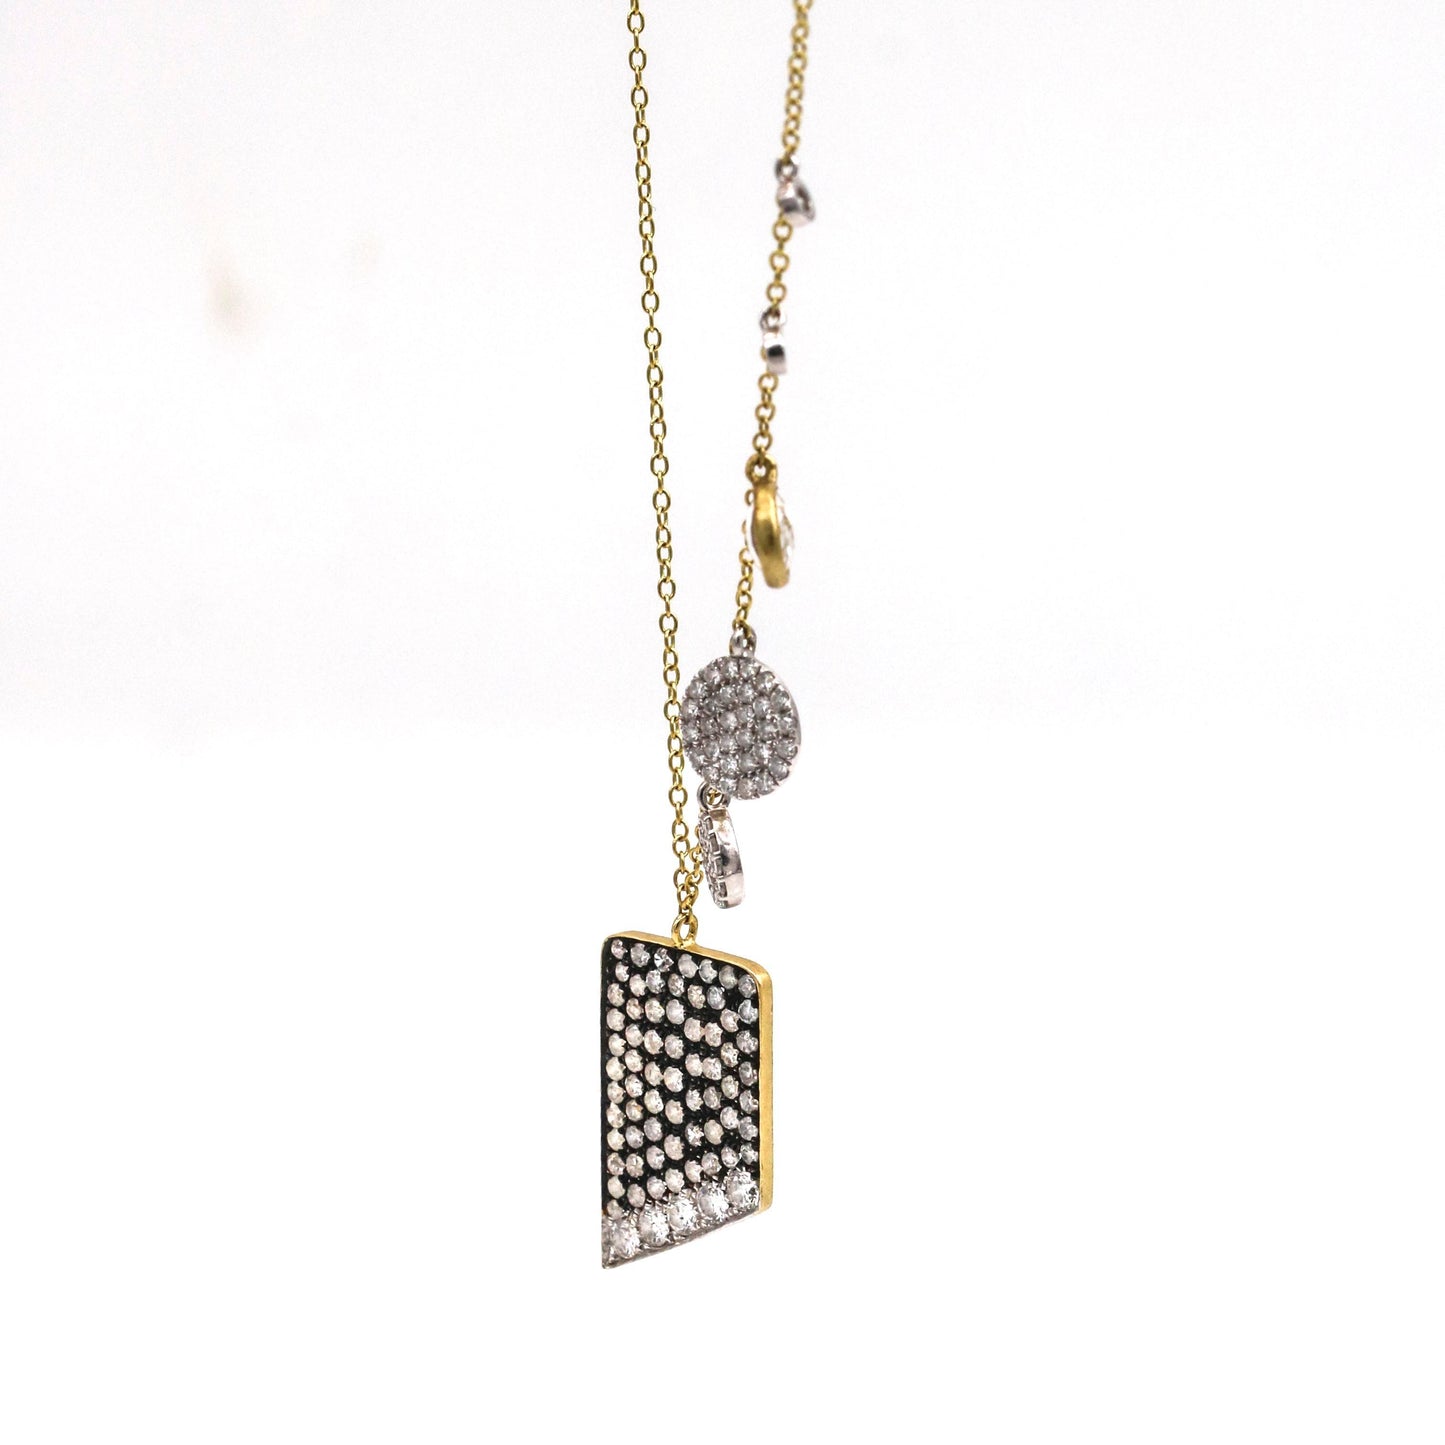 Meira T Diamond Tag Pendant Necklace in 14k Yellow Gold - 31 Jewels Inc.